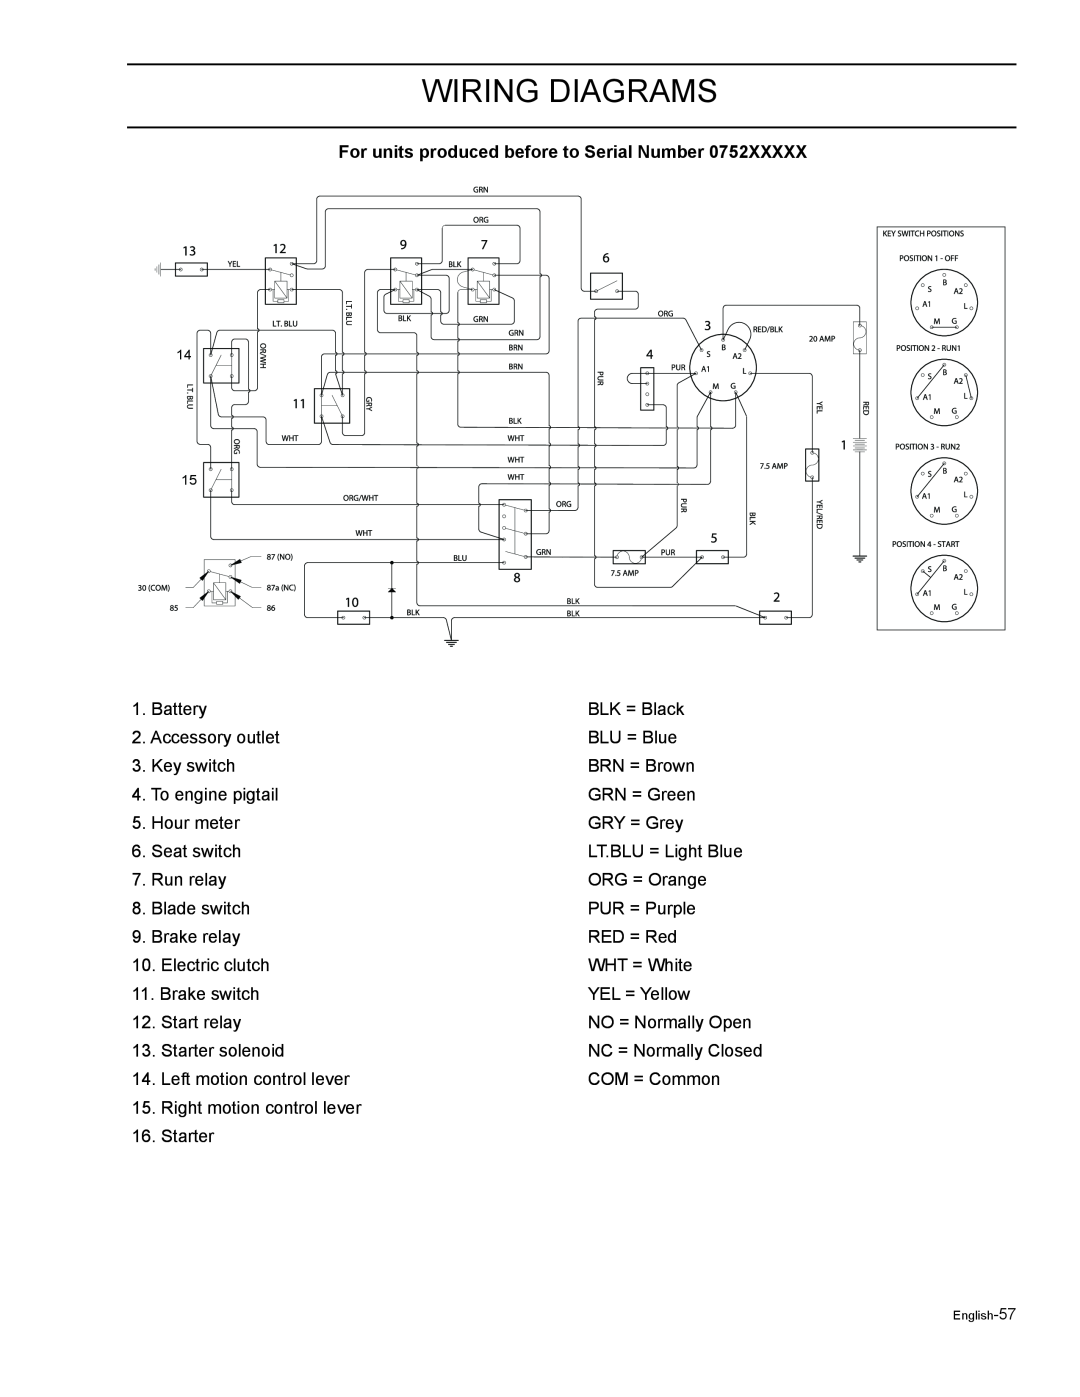 HTC Z4824BF, Z4619, Z5426BF, Z4220BF, Z4219 Wiring Diagrams, For units produced before to Serial Number, English-57 